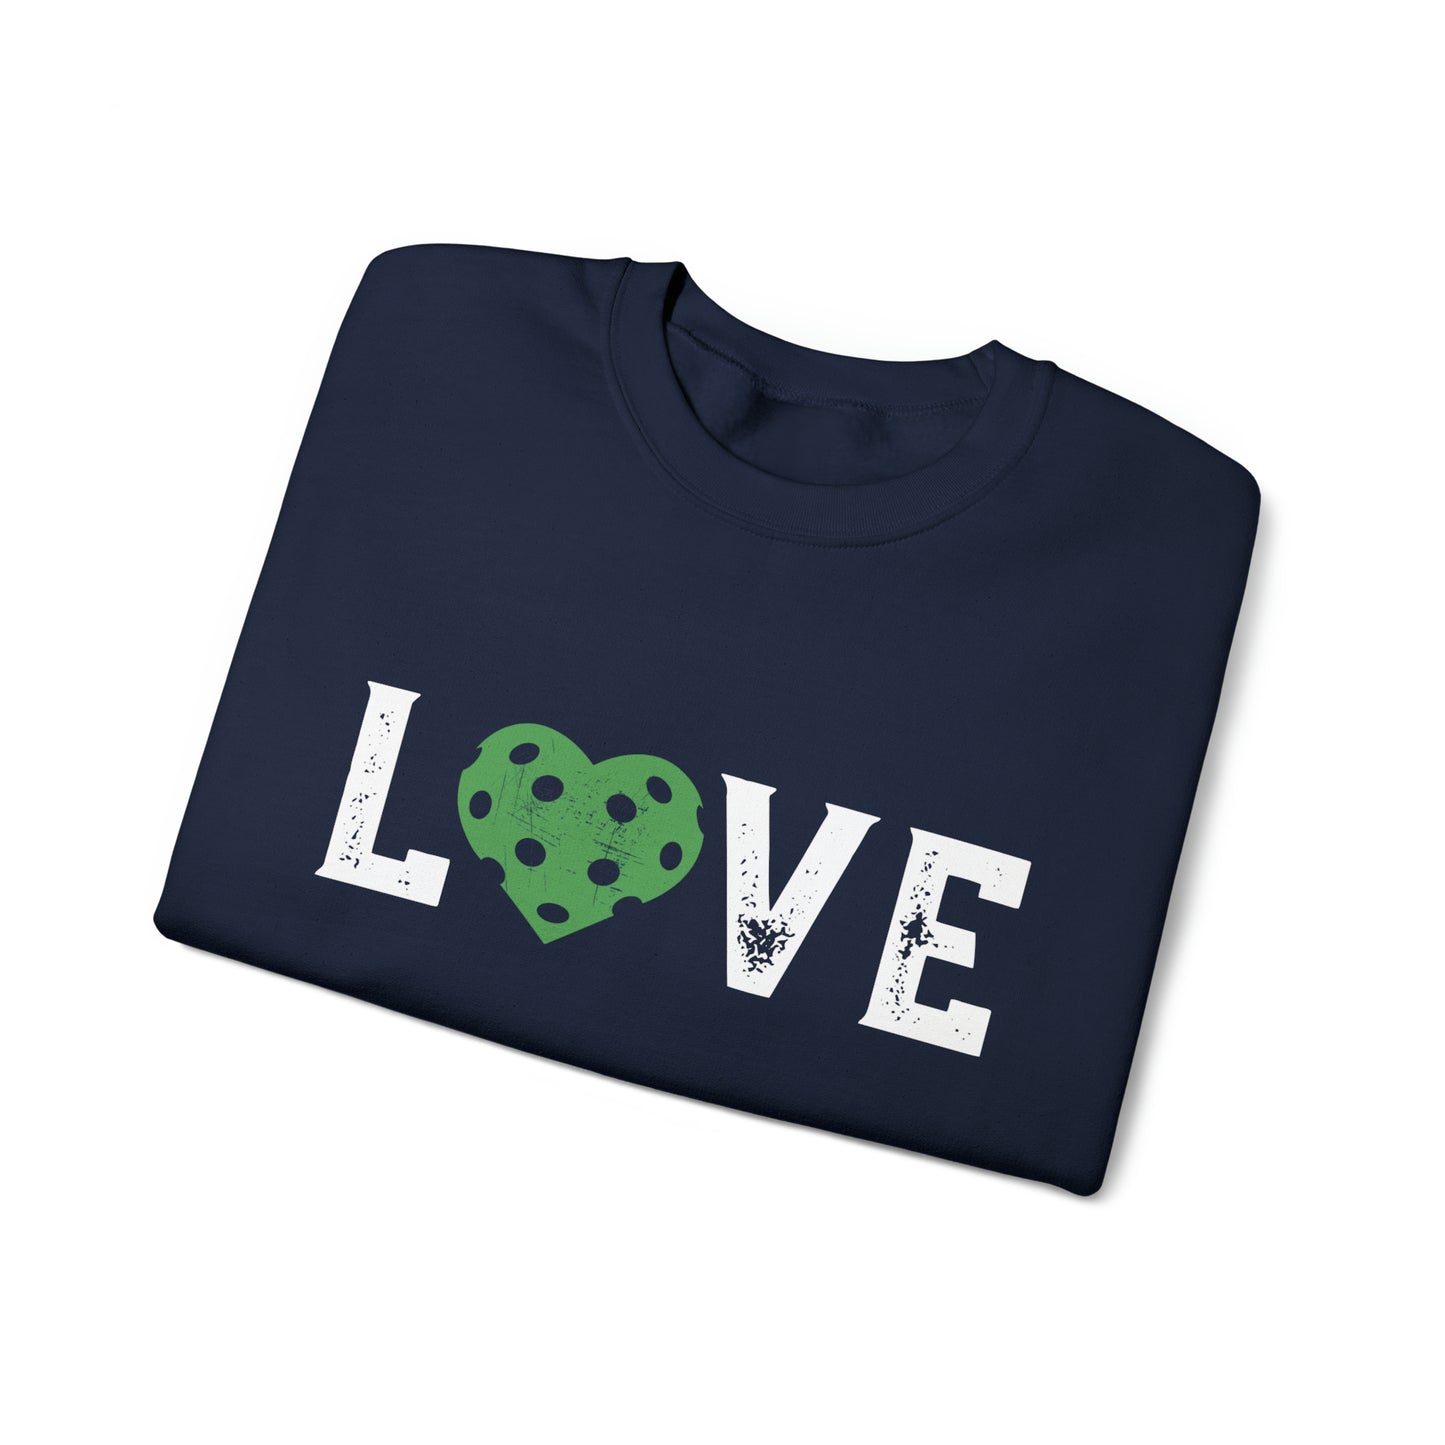 LOVE Net Game Crew Navy - Customize sleeves, Add in notes